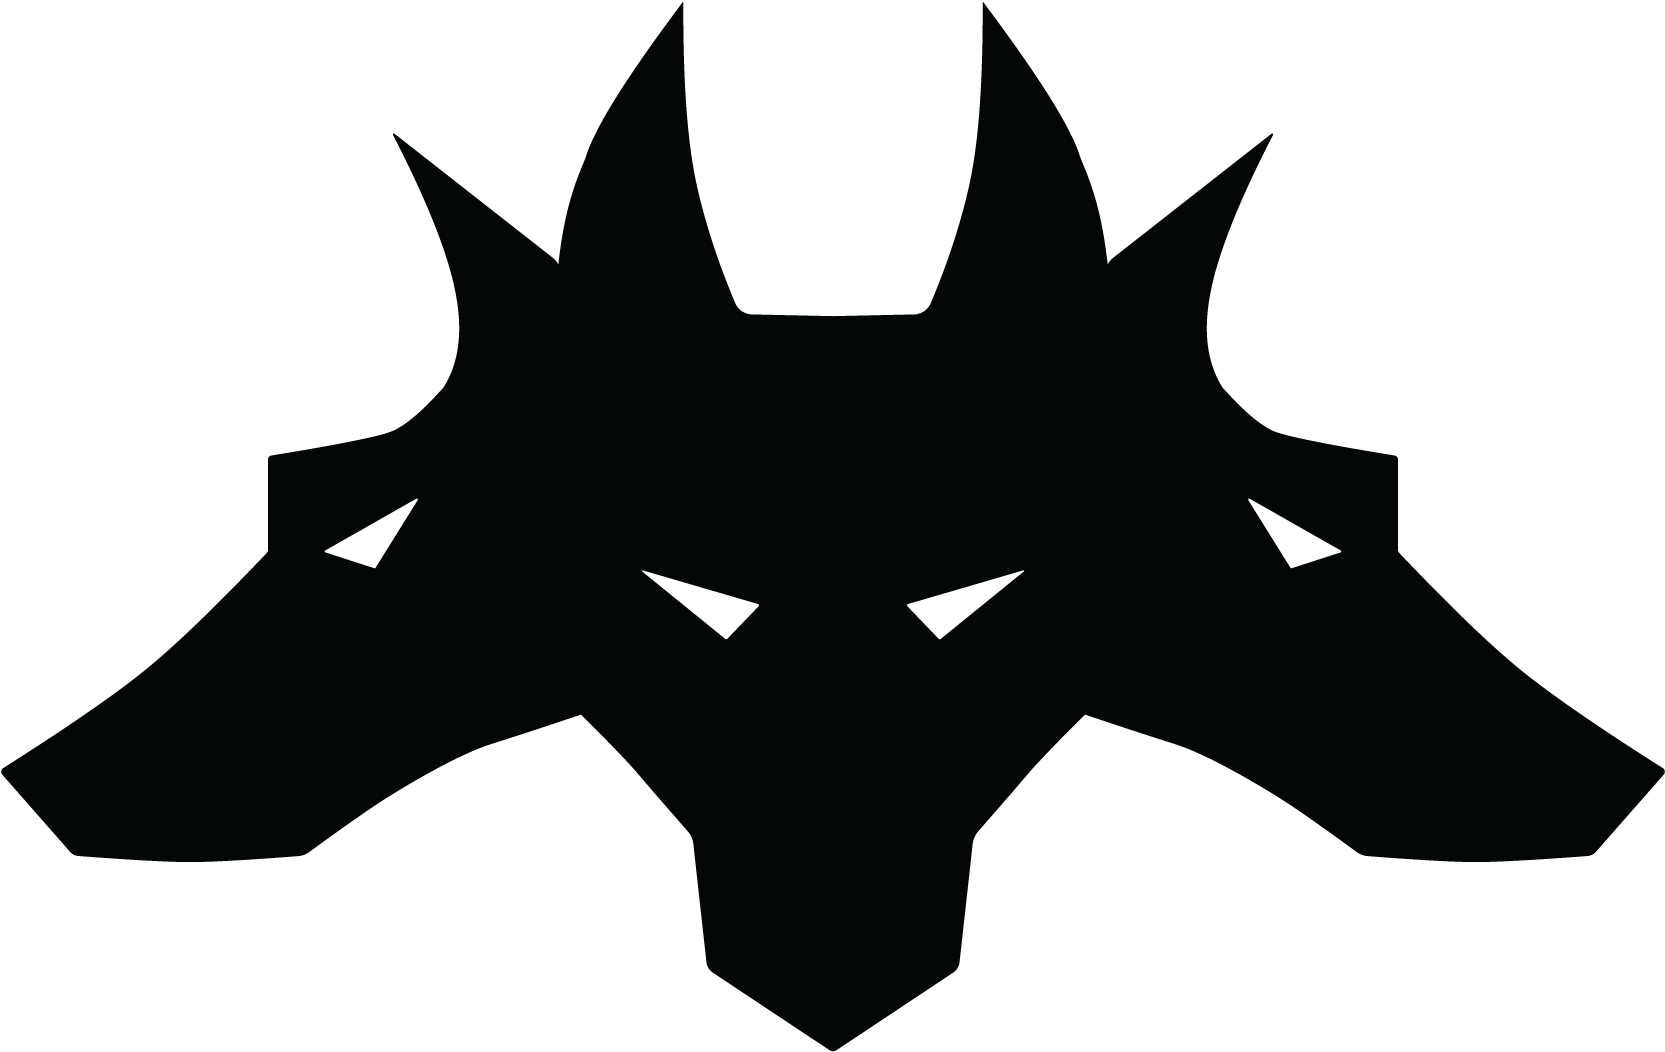 Cerberus Silhouette Graphic PNG image